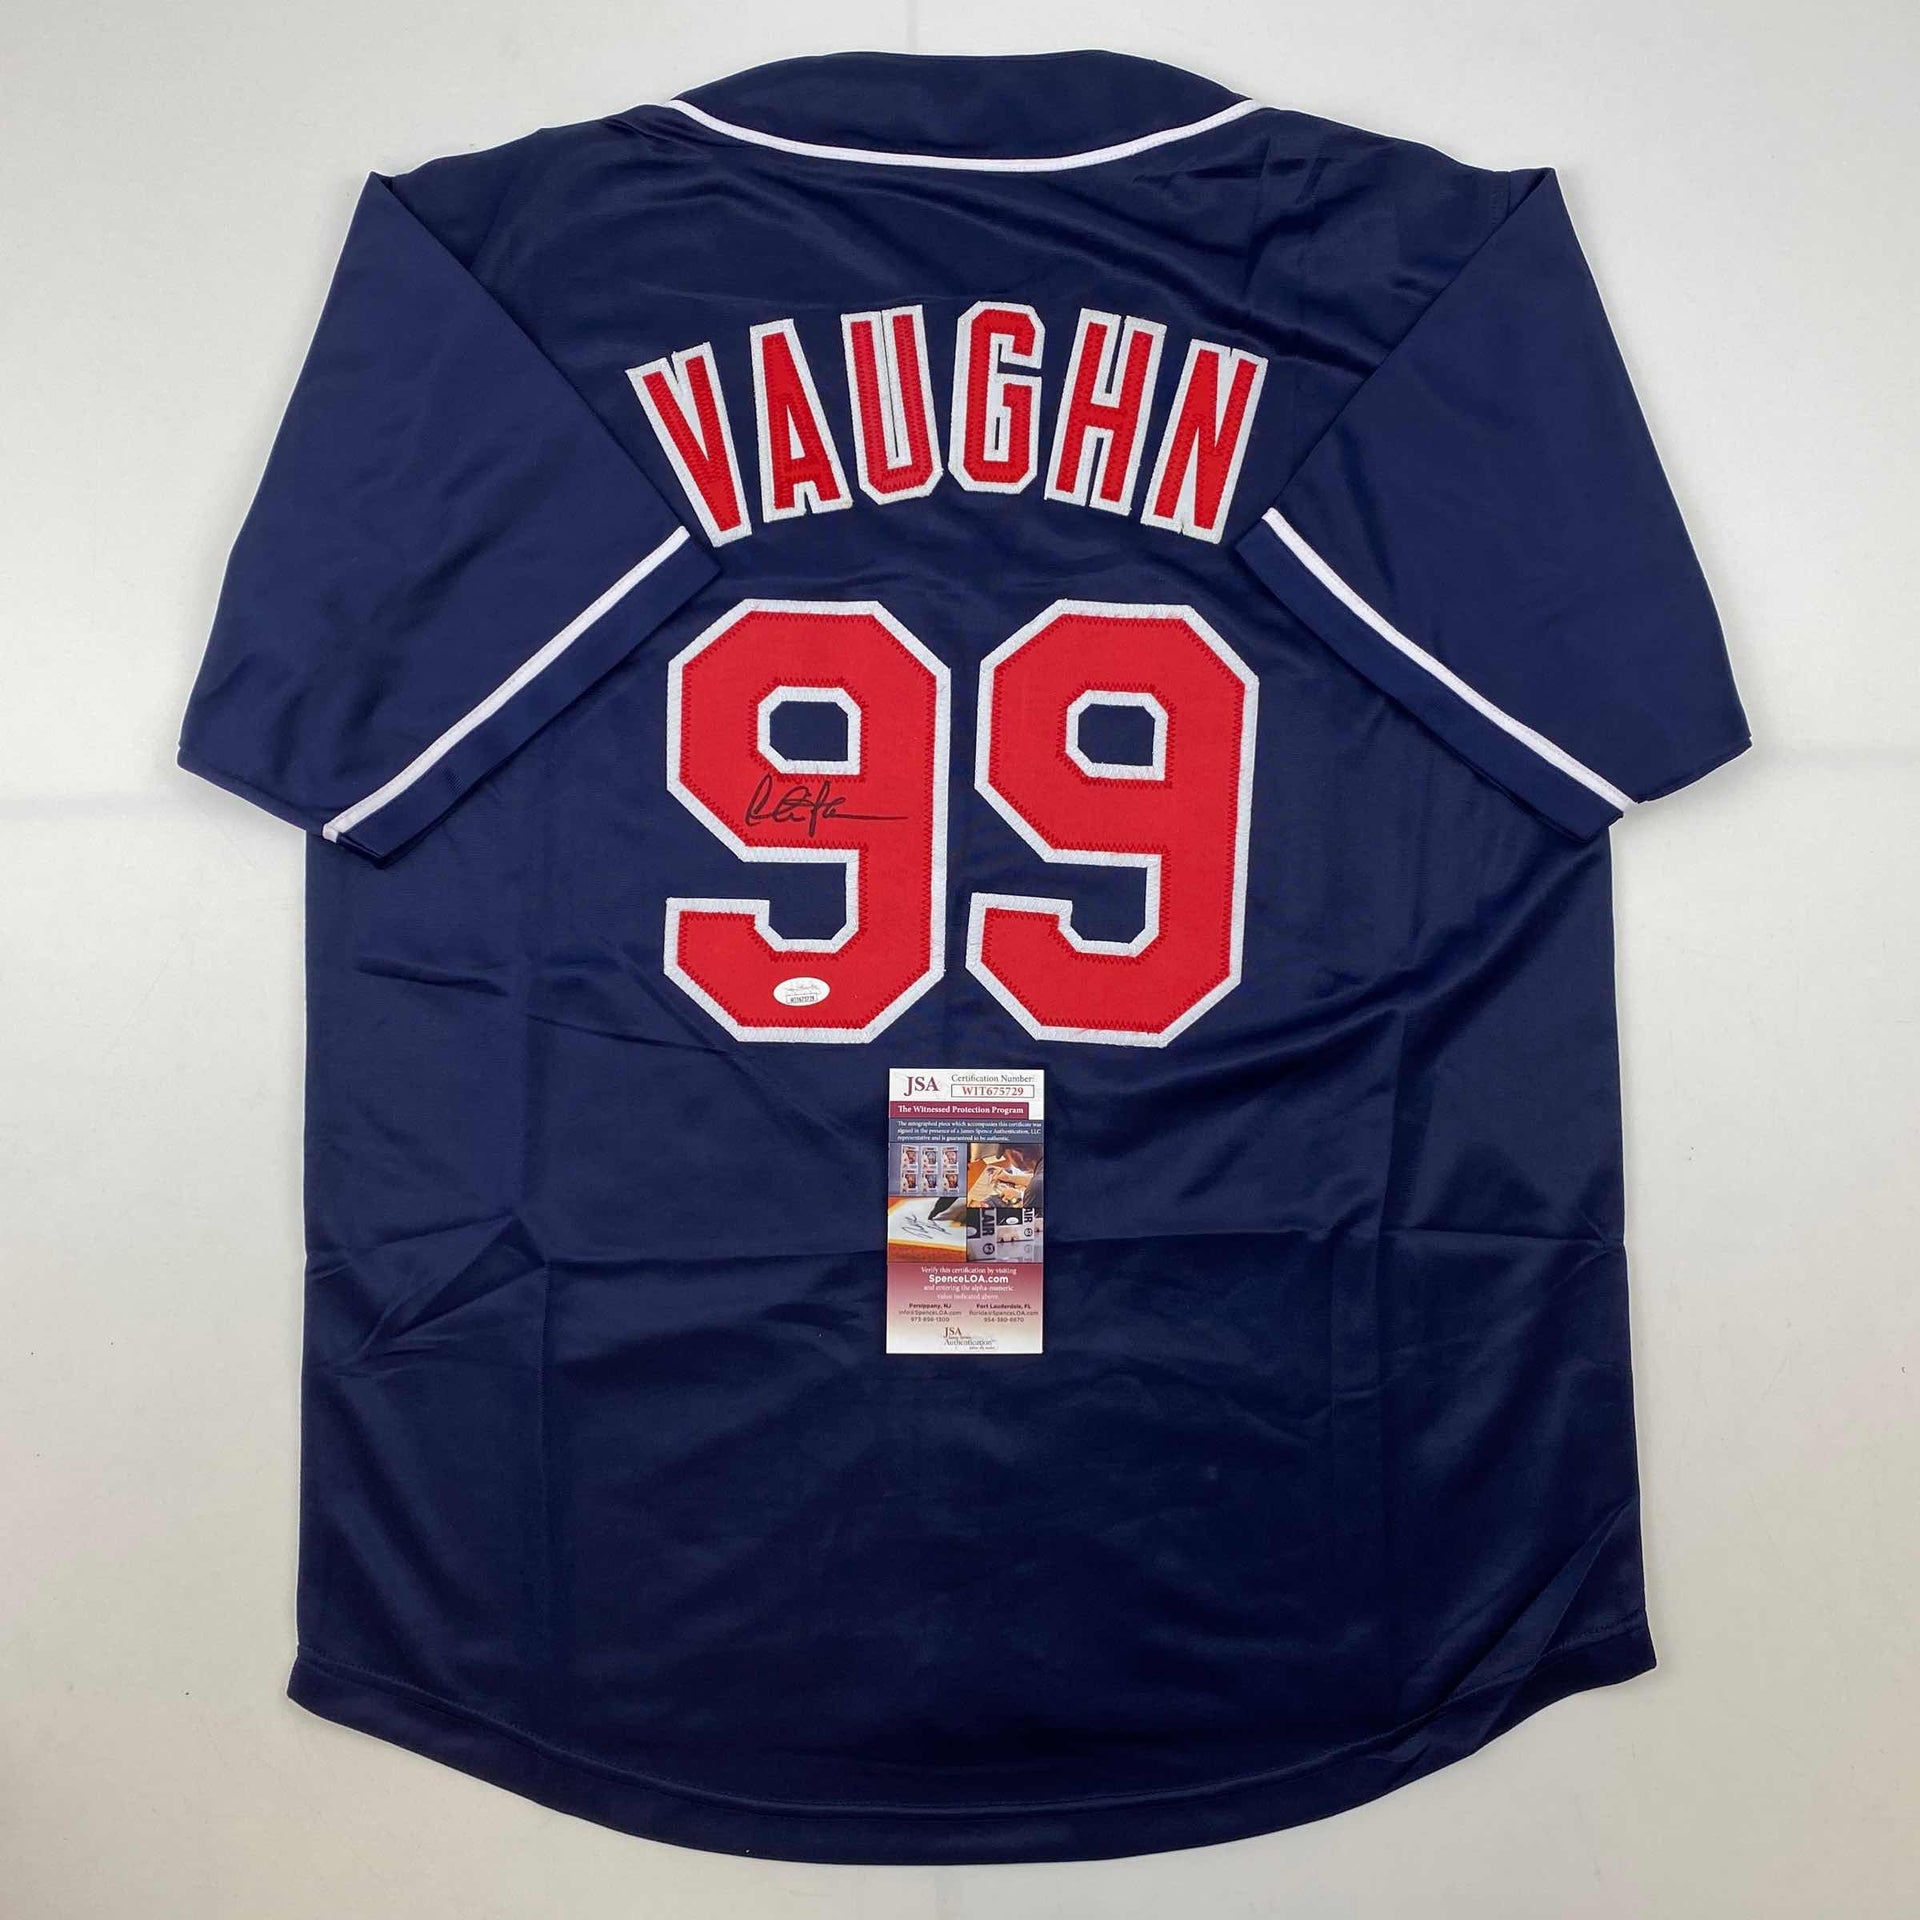 Topps readies Ricky Vaughn-Charlie Sheen jersey cards for upcoming